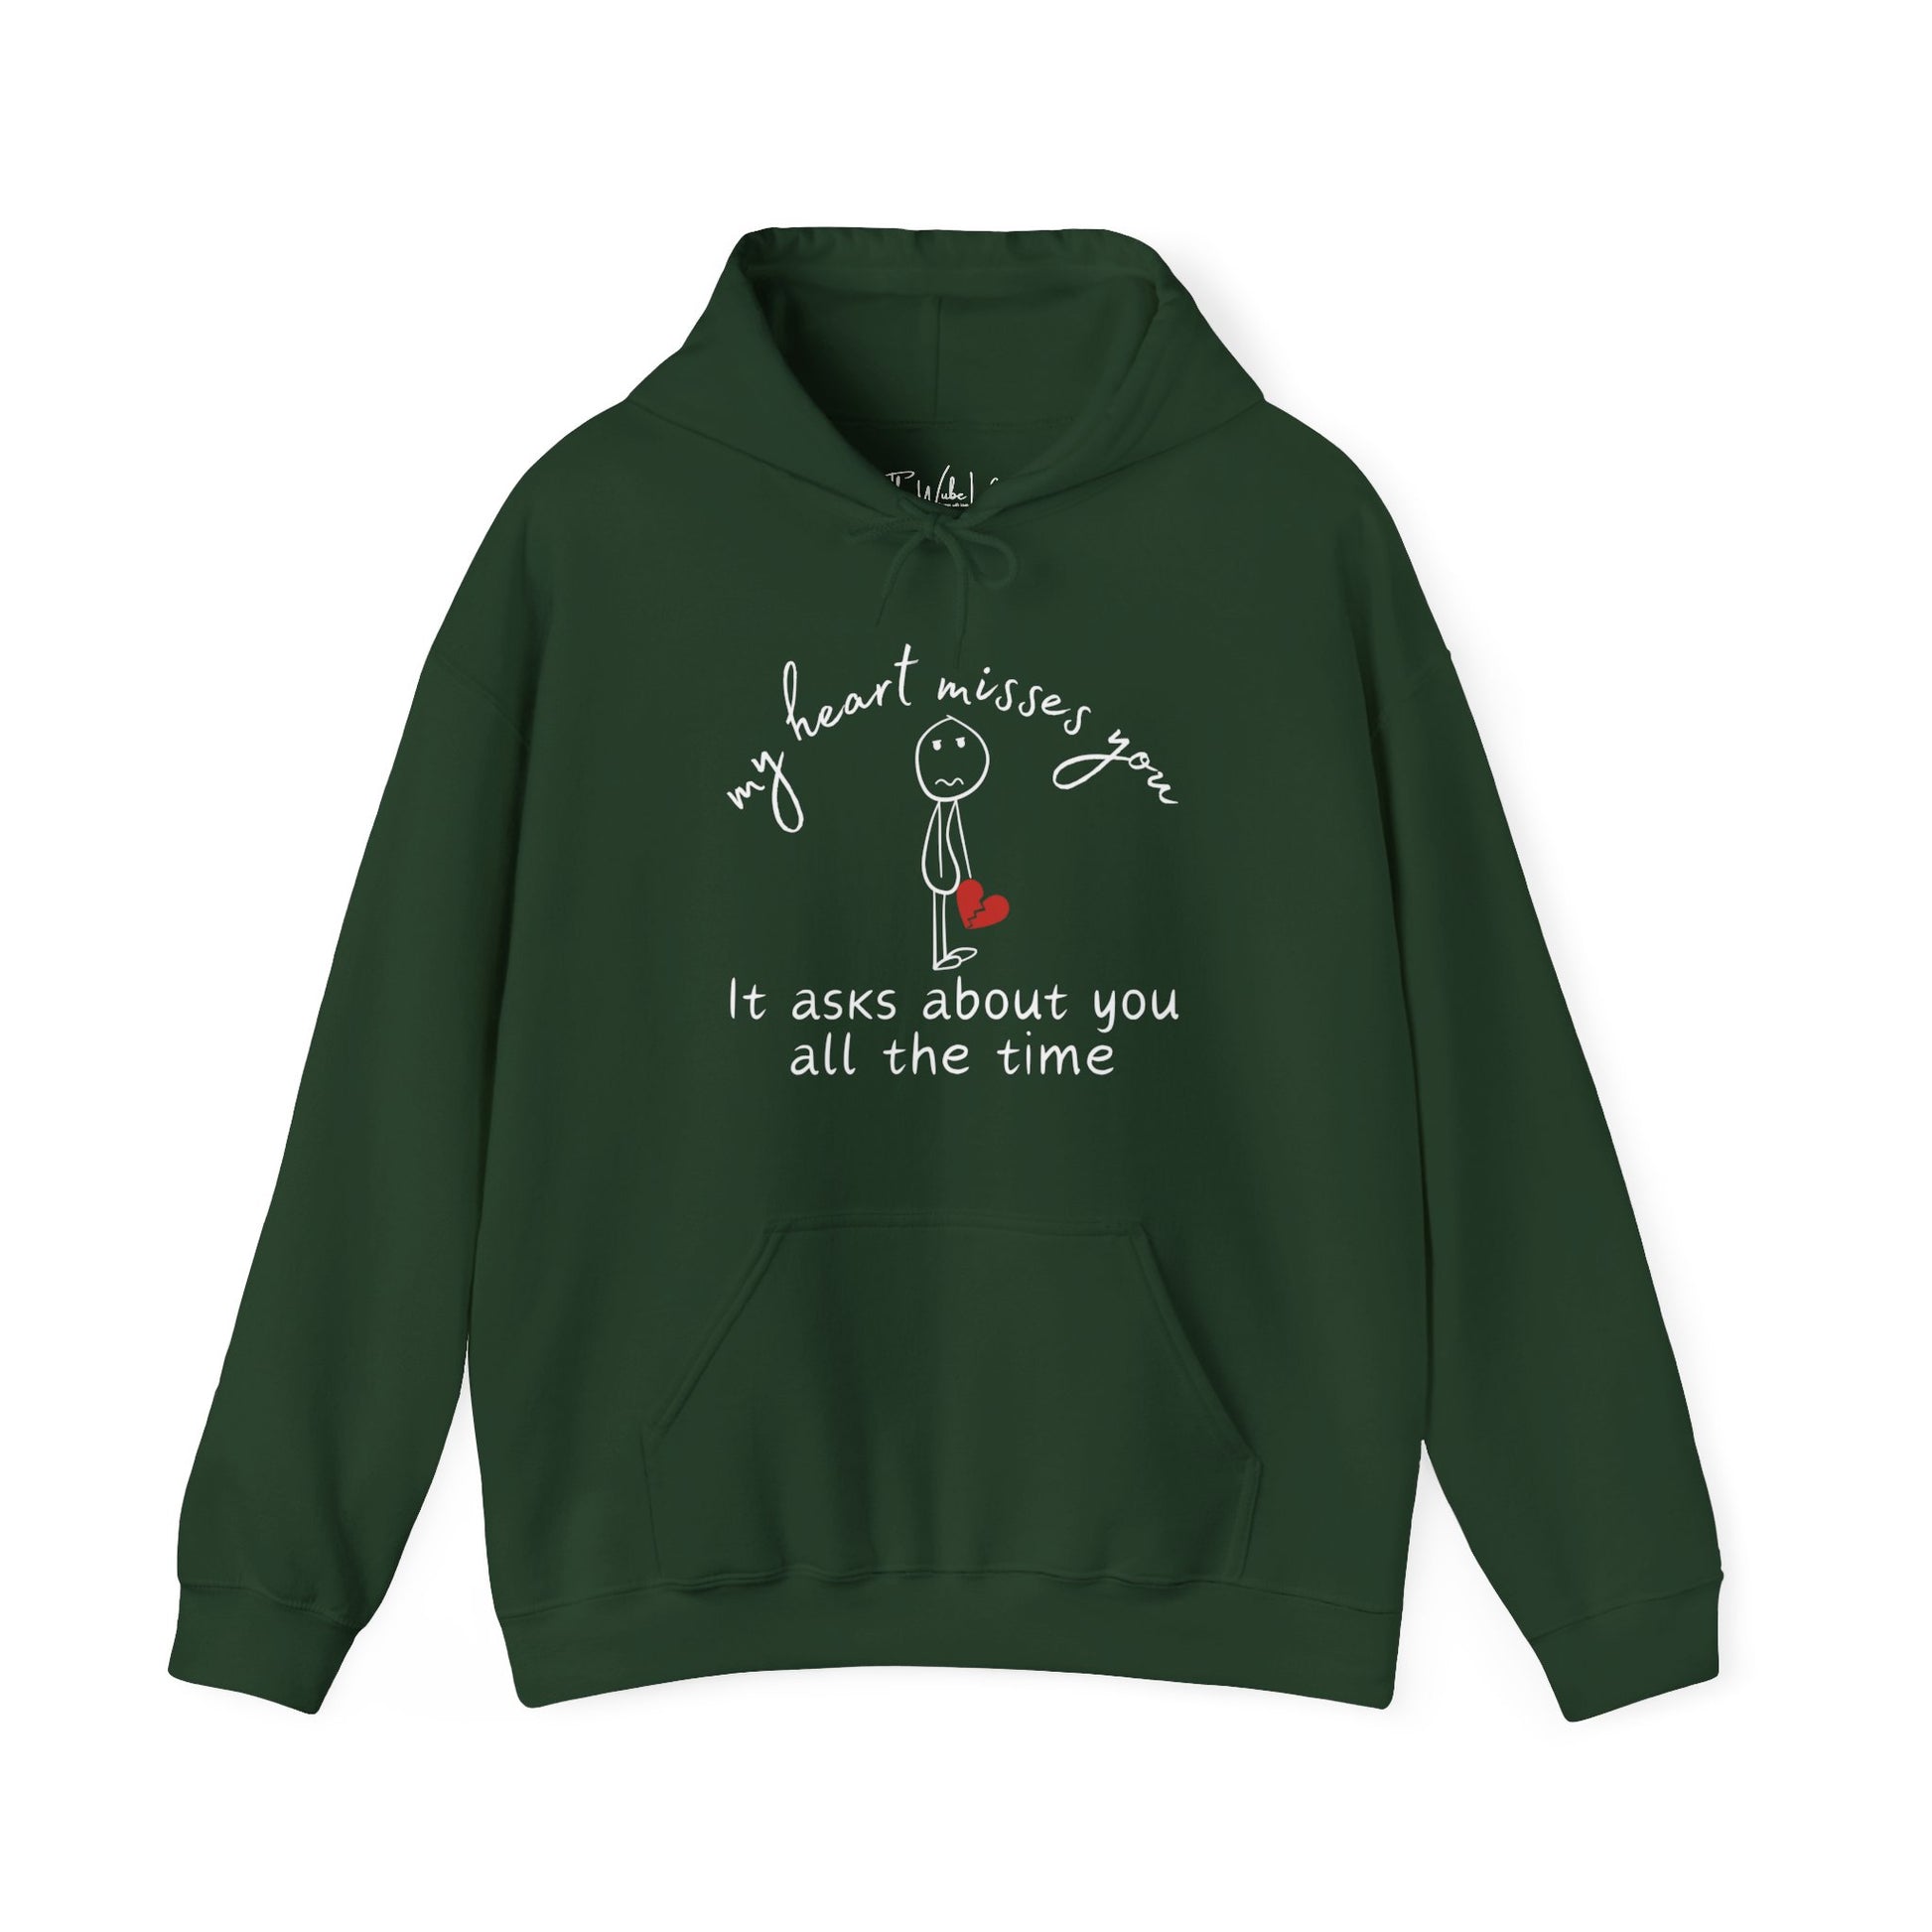 Gildan 18500 Hooded Sweatshirt, color: Forest Green - hoodie to keep the memory of your loved on close during loss.